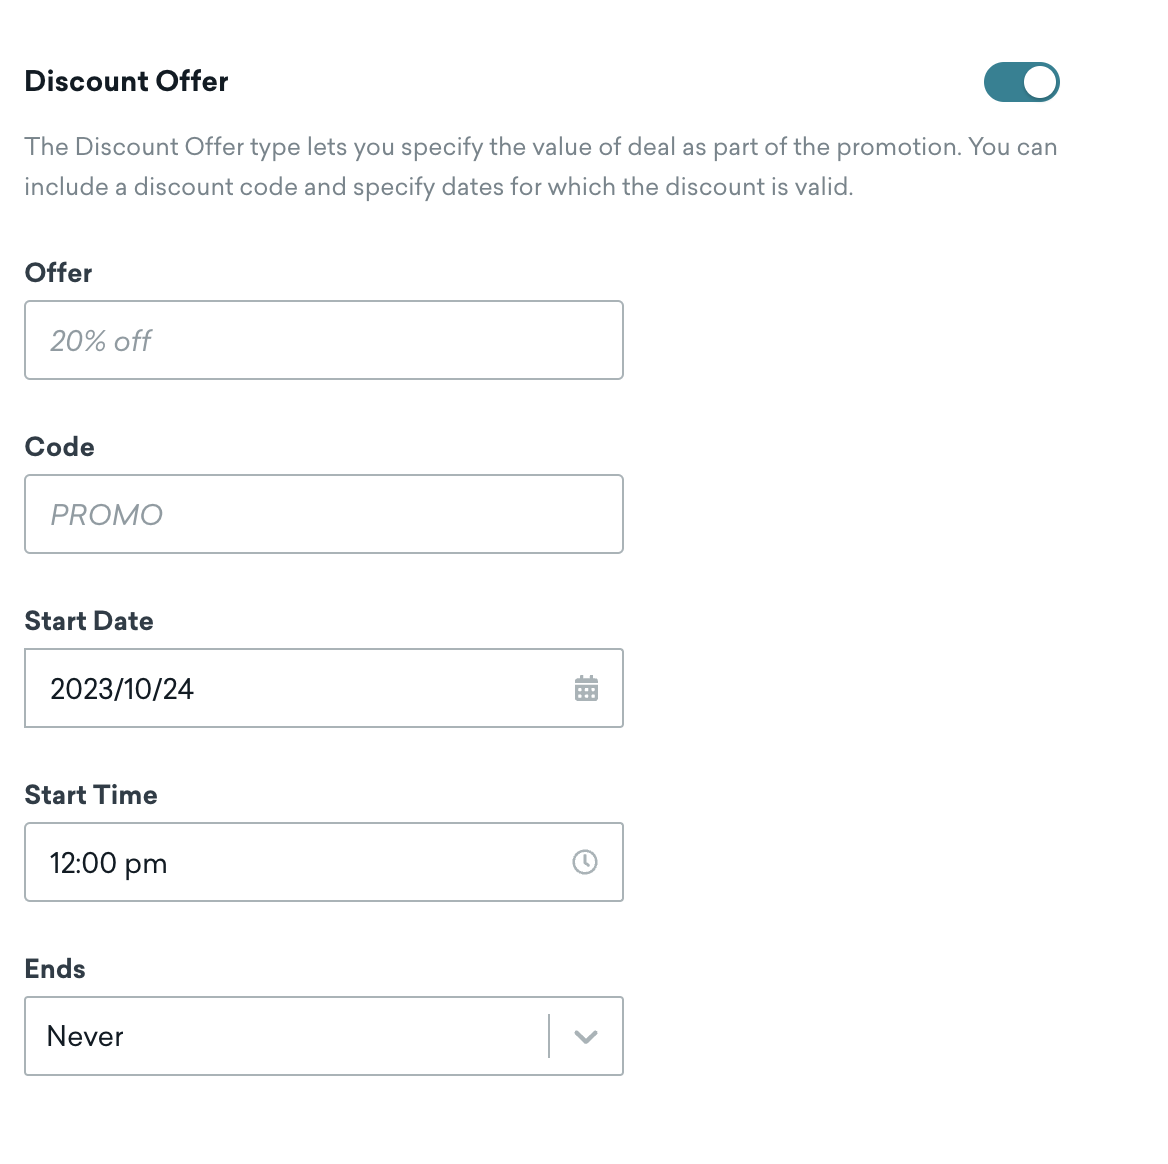 Options to specify the offer value, code, and start date and time for a discount offer.